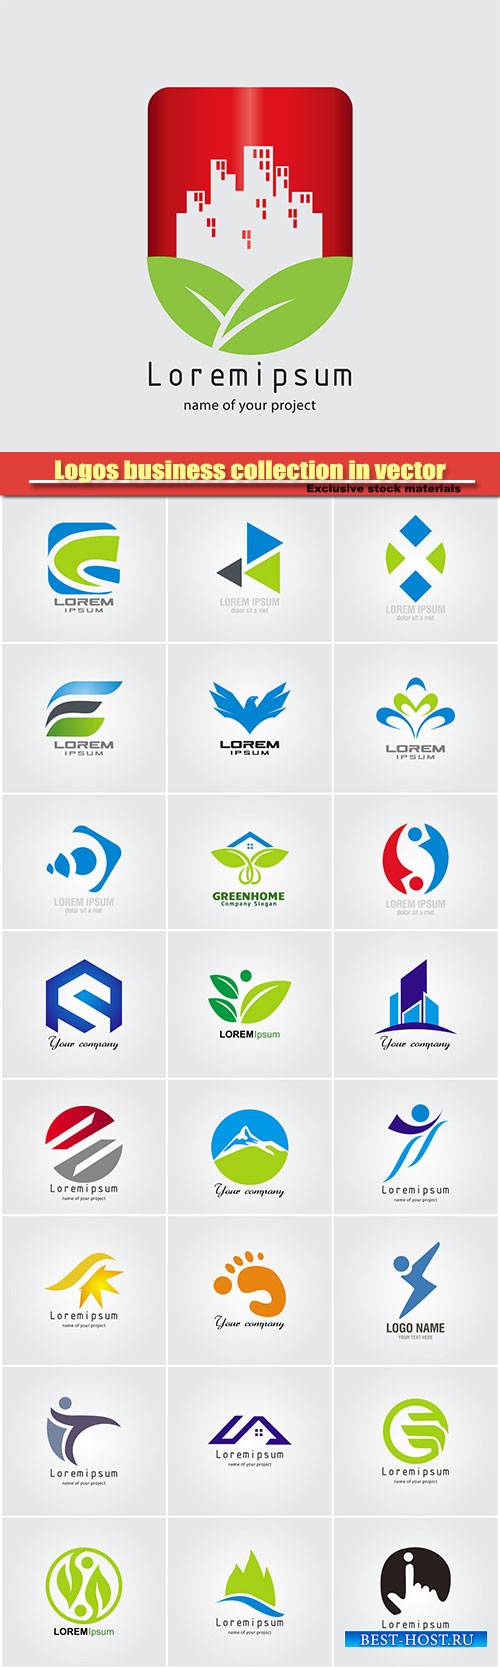 Logos business collection in vector #31